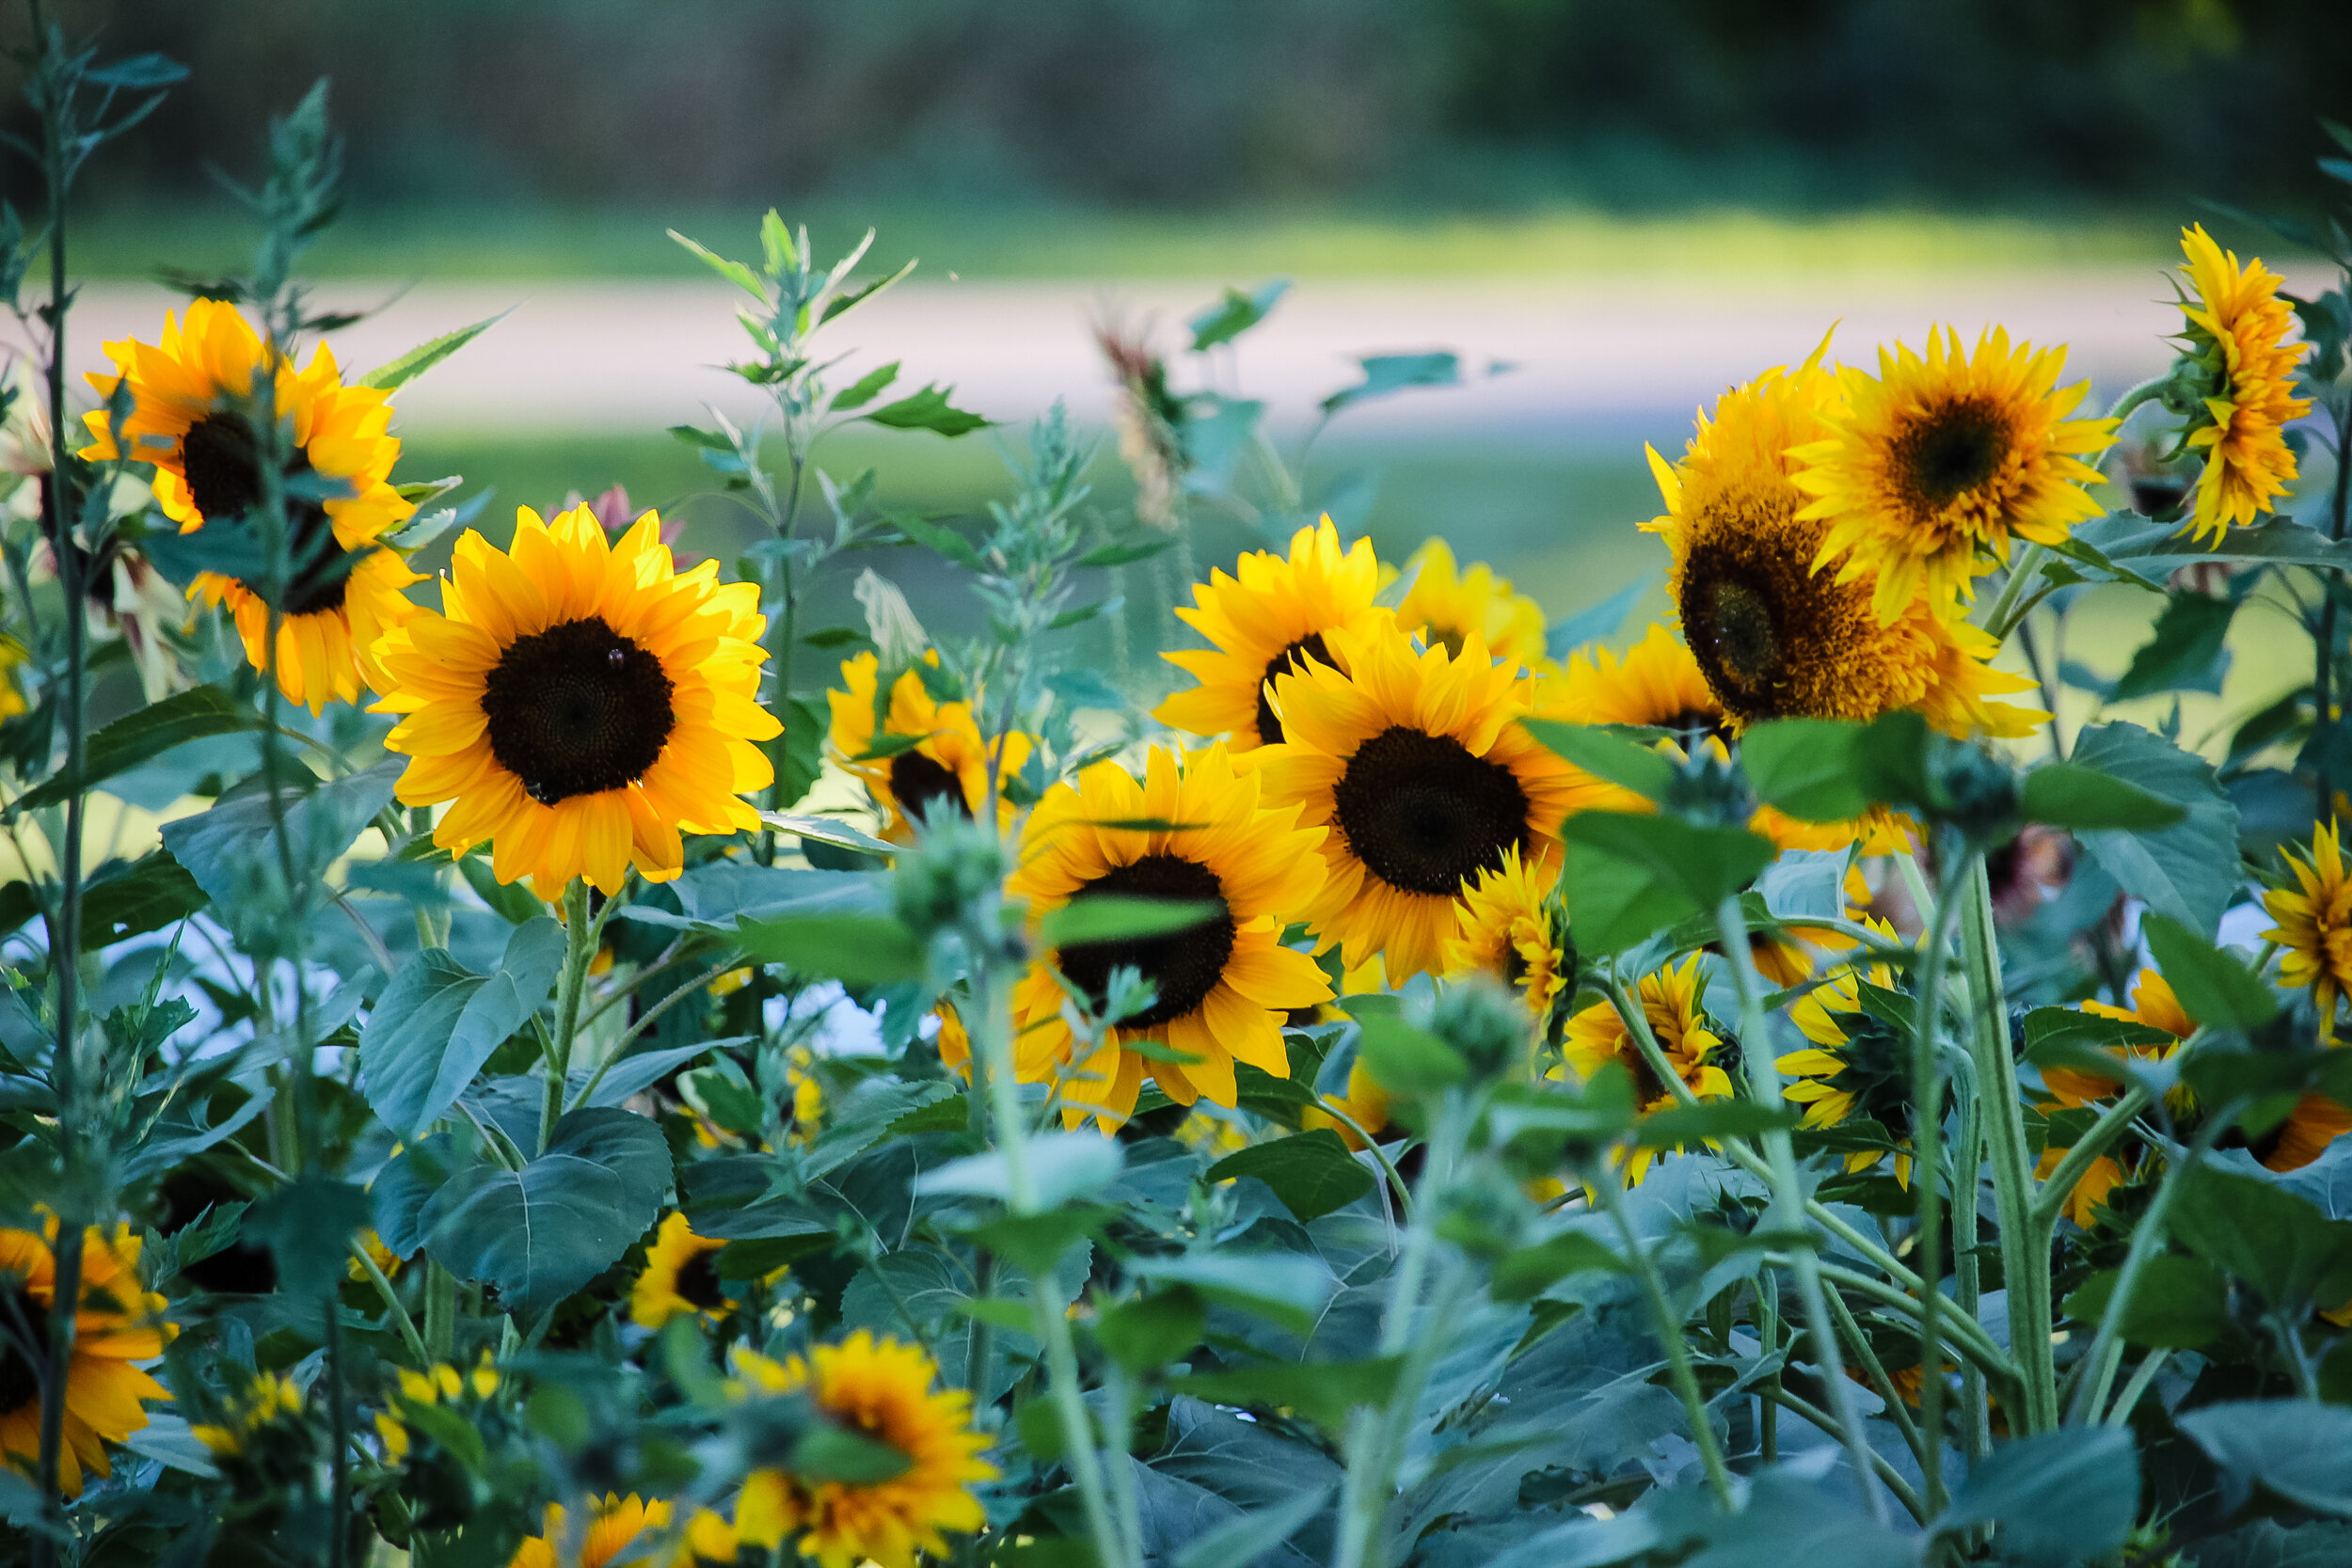 Selecting The Right Sunflower Variety For Your Garden